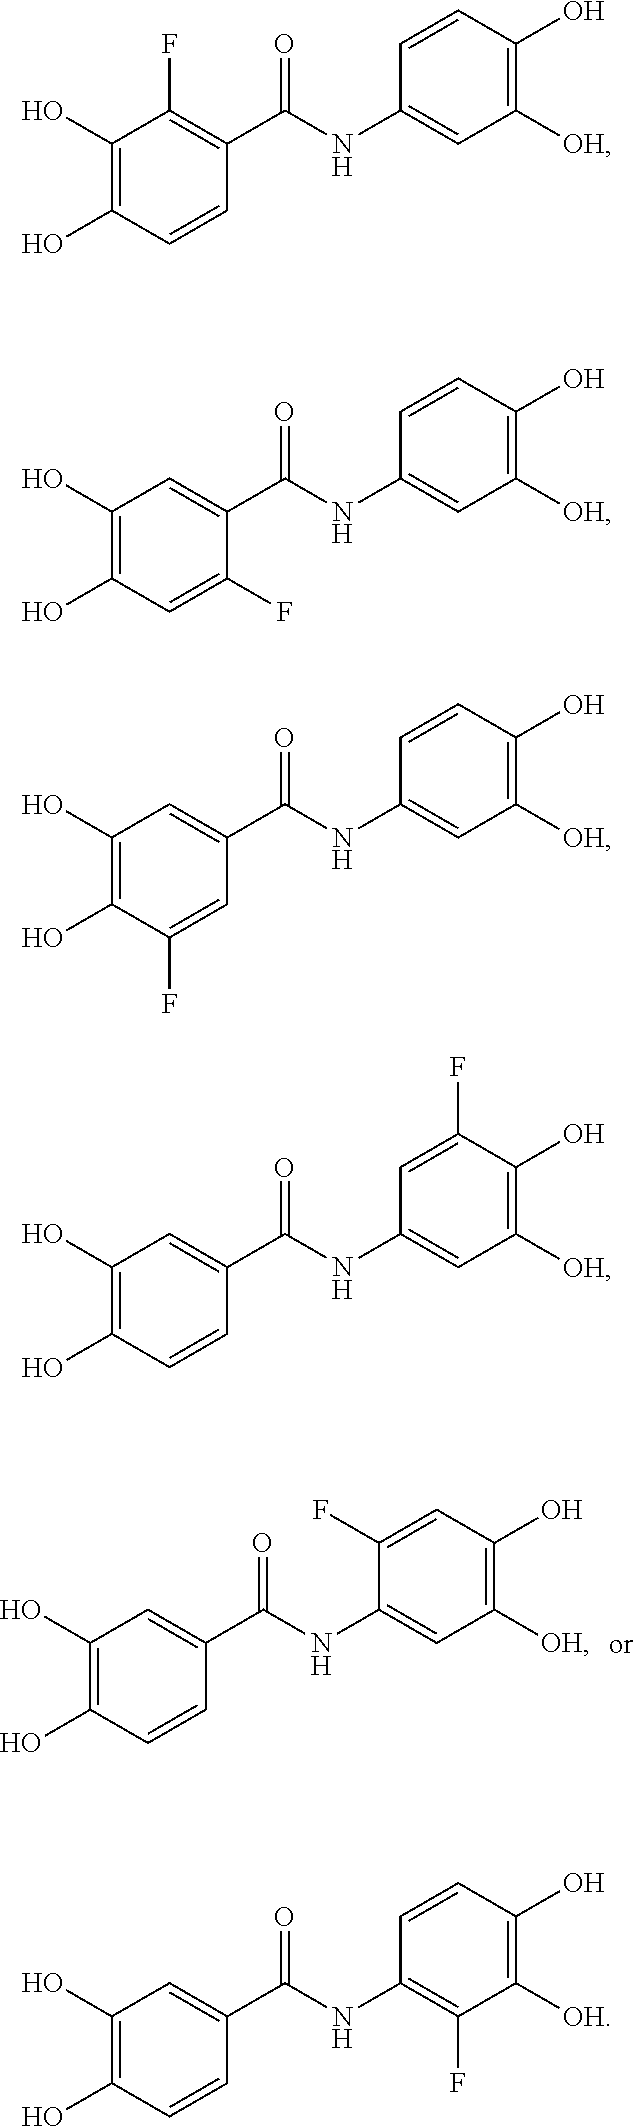 Substituted n-aryl benzamides and related compounds for treatment of amyloid diseases and synucleinopathies